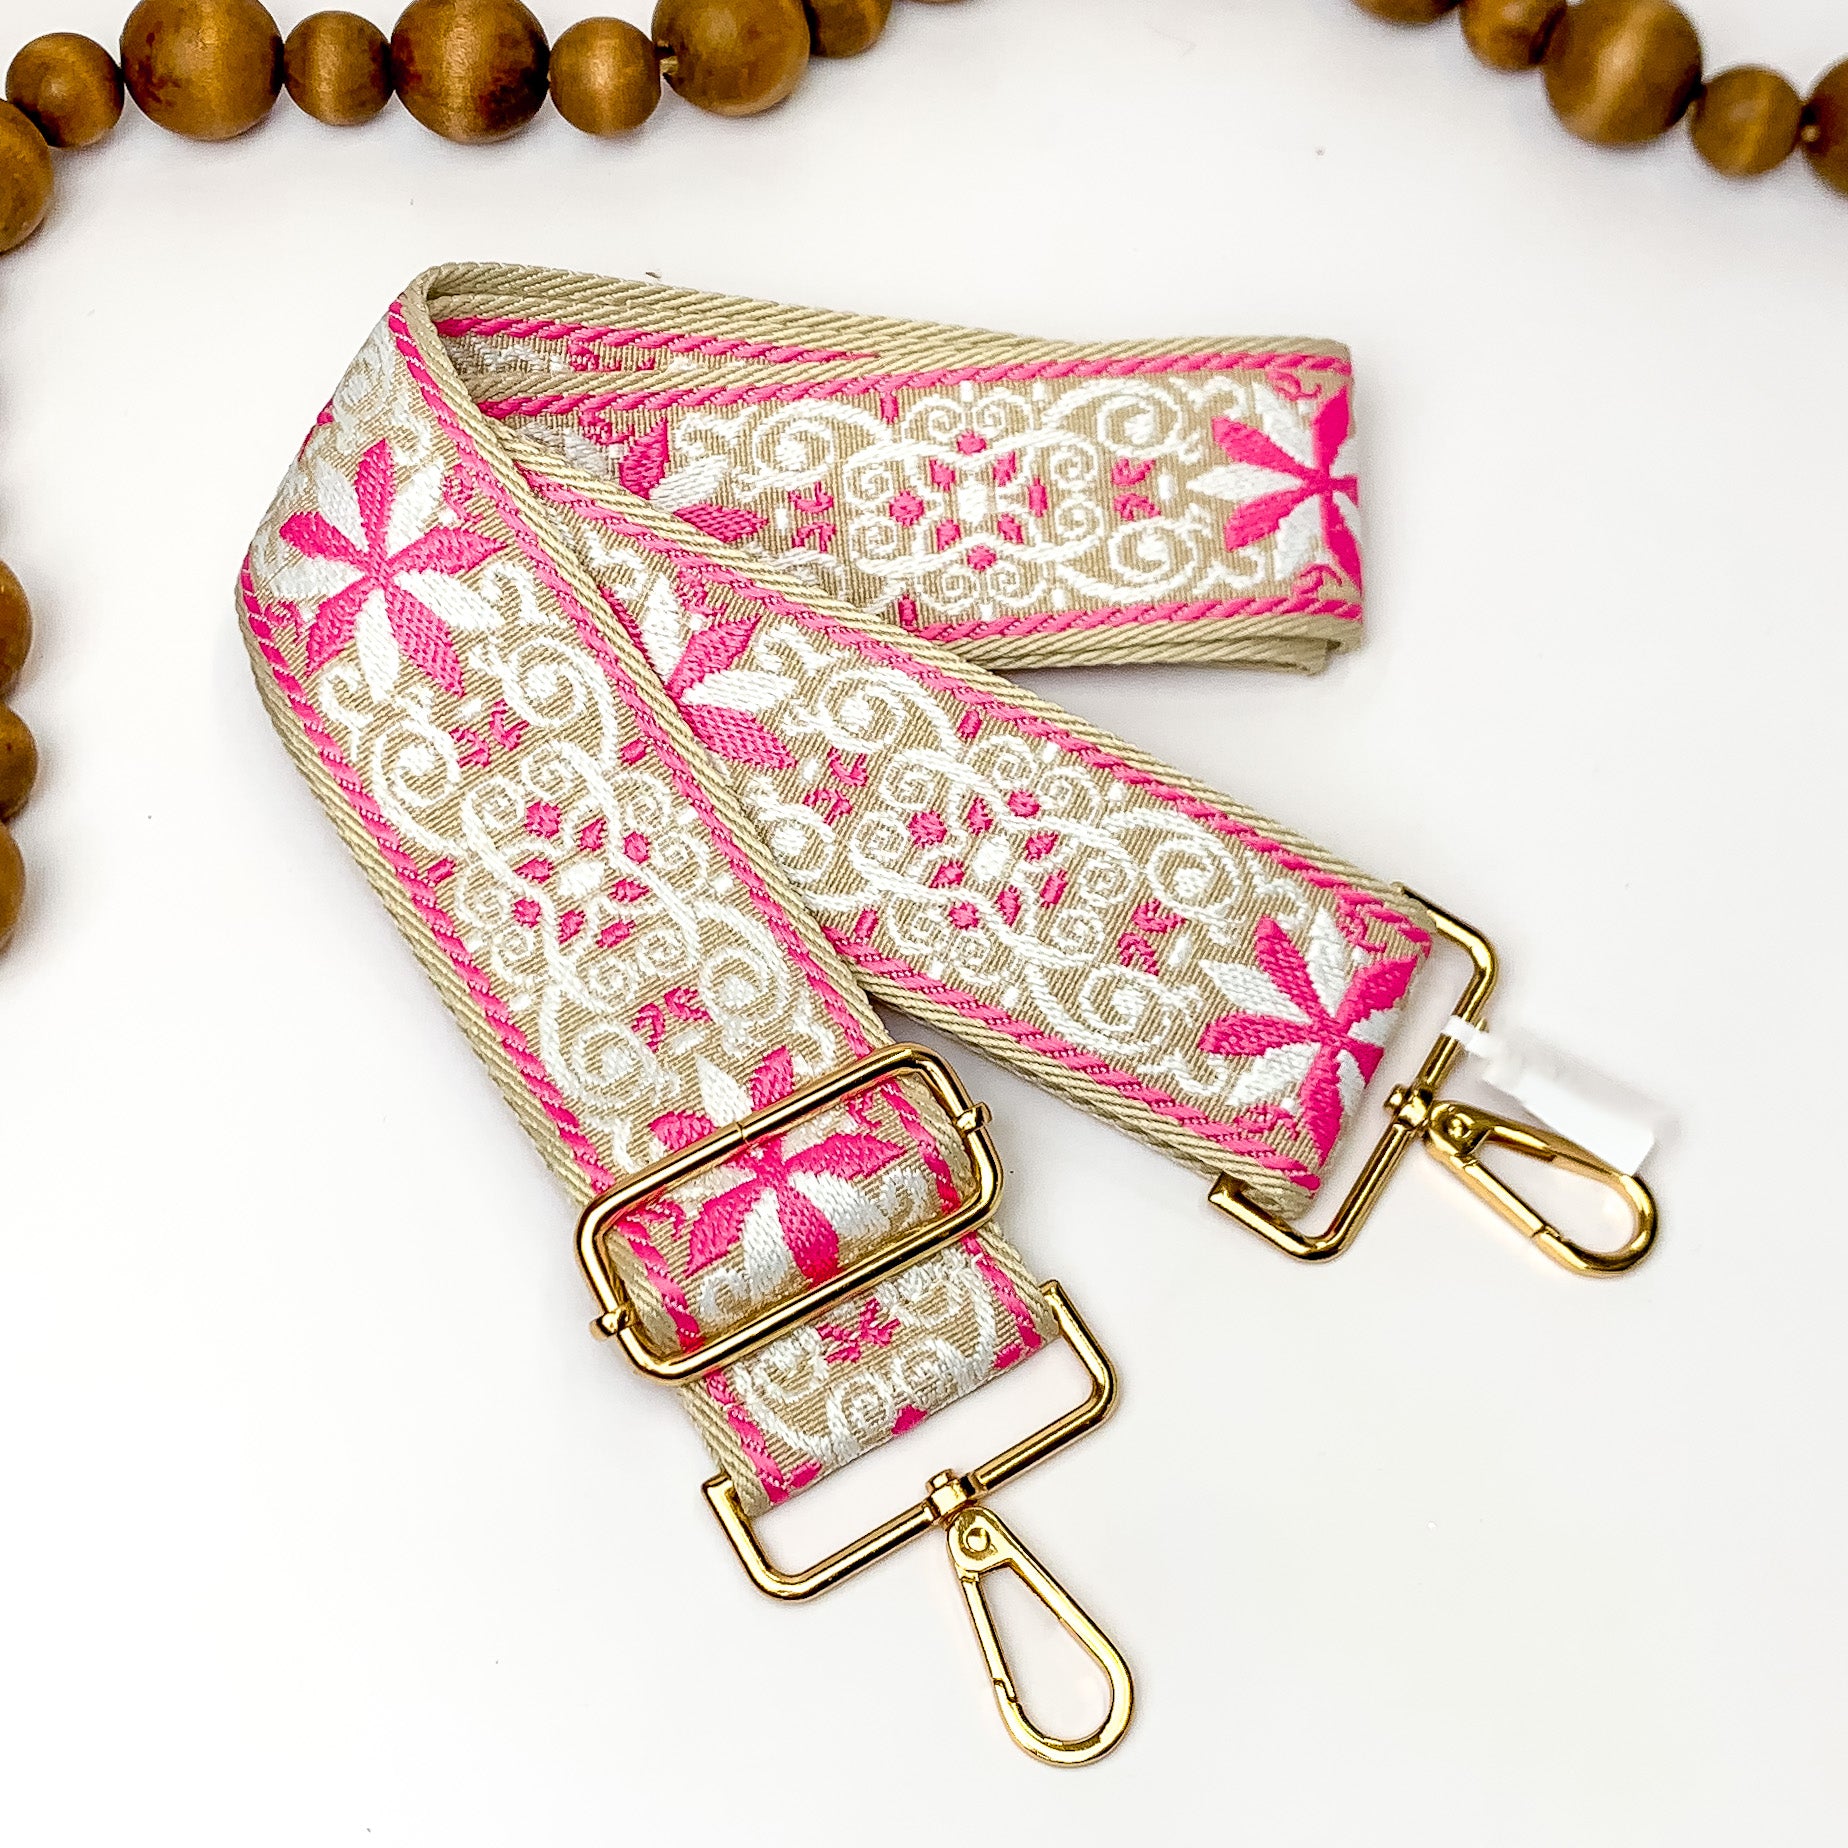 Beige canvas purse strap with white and pink embroidered design. This purse strap includes gold accents. This purse strap is pictured on a white background with wood beads at the top.